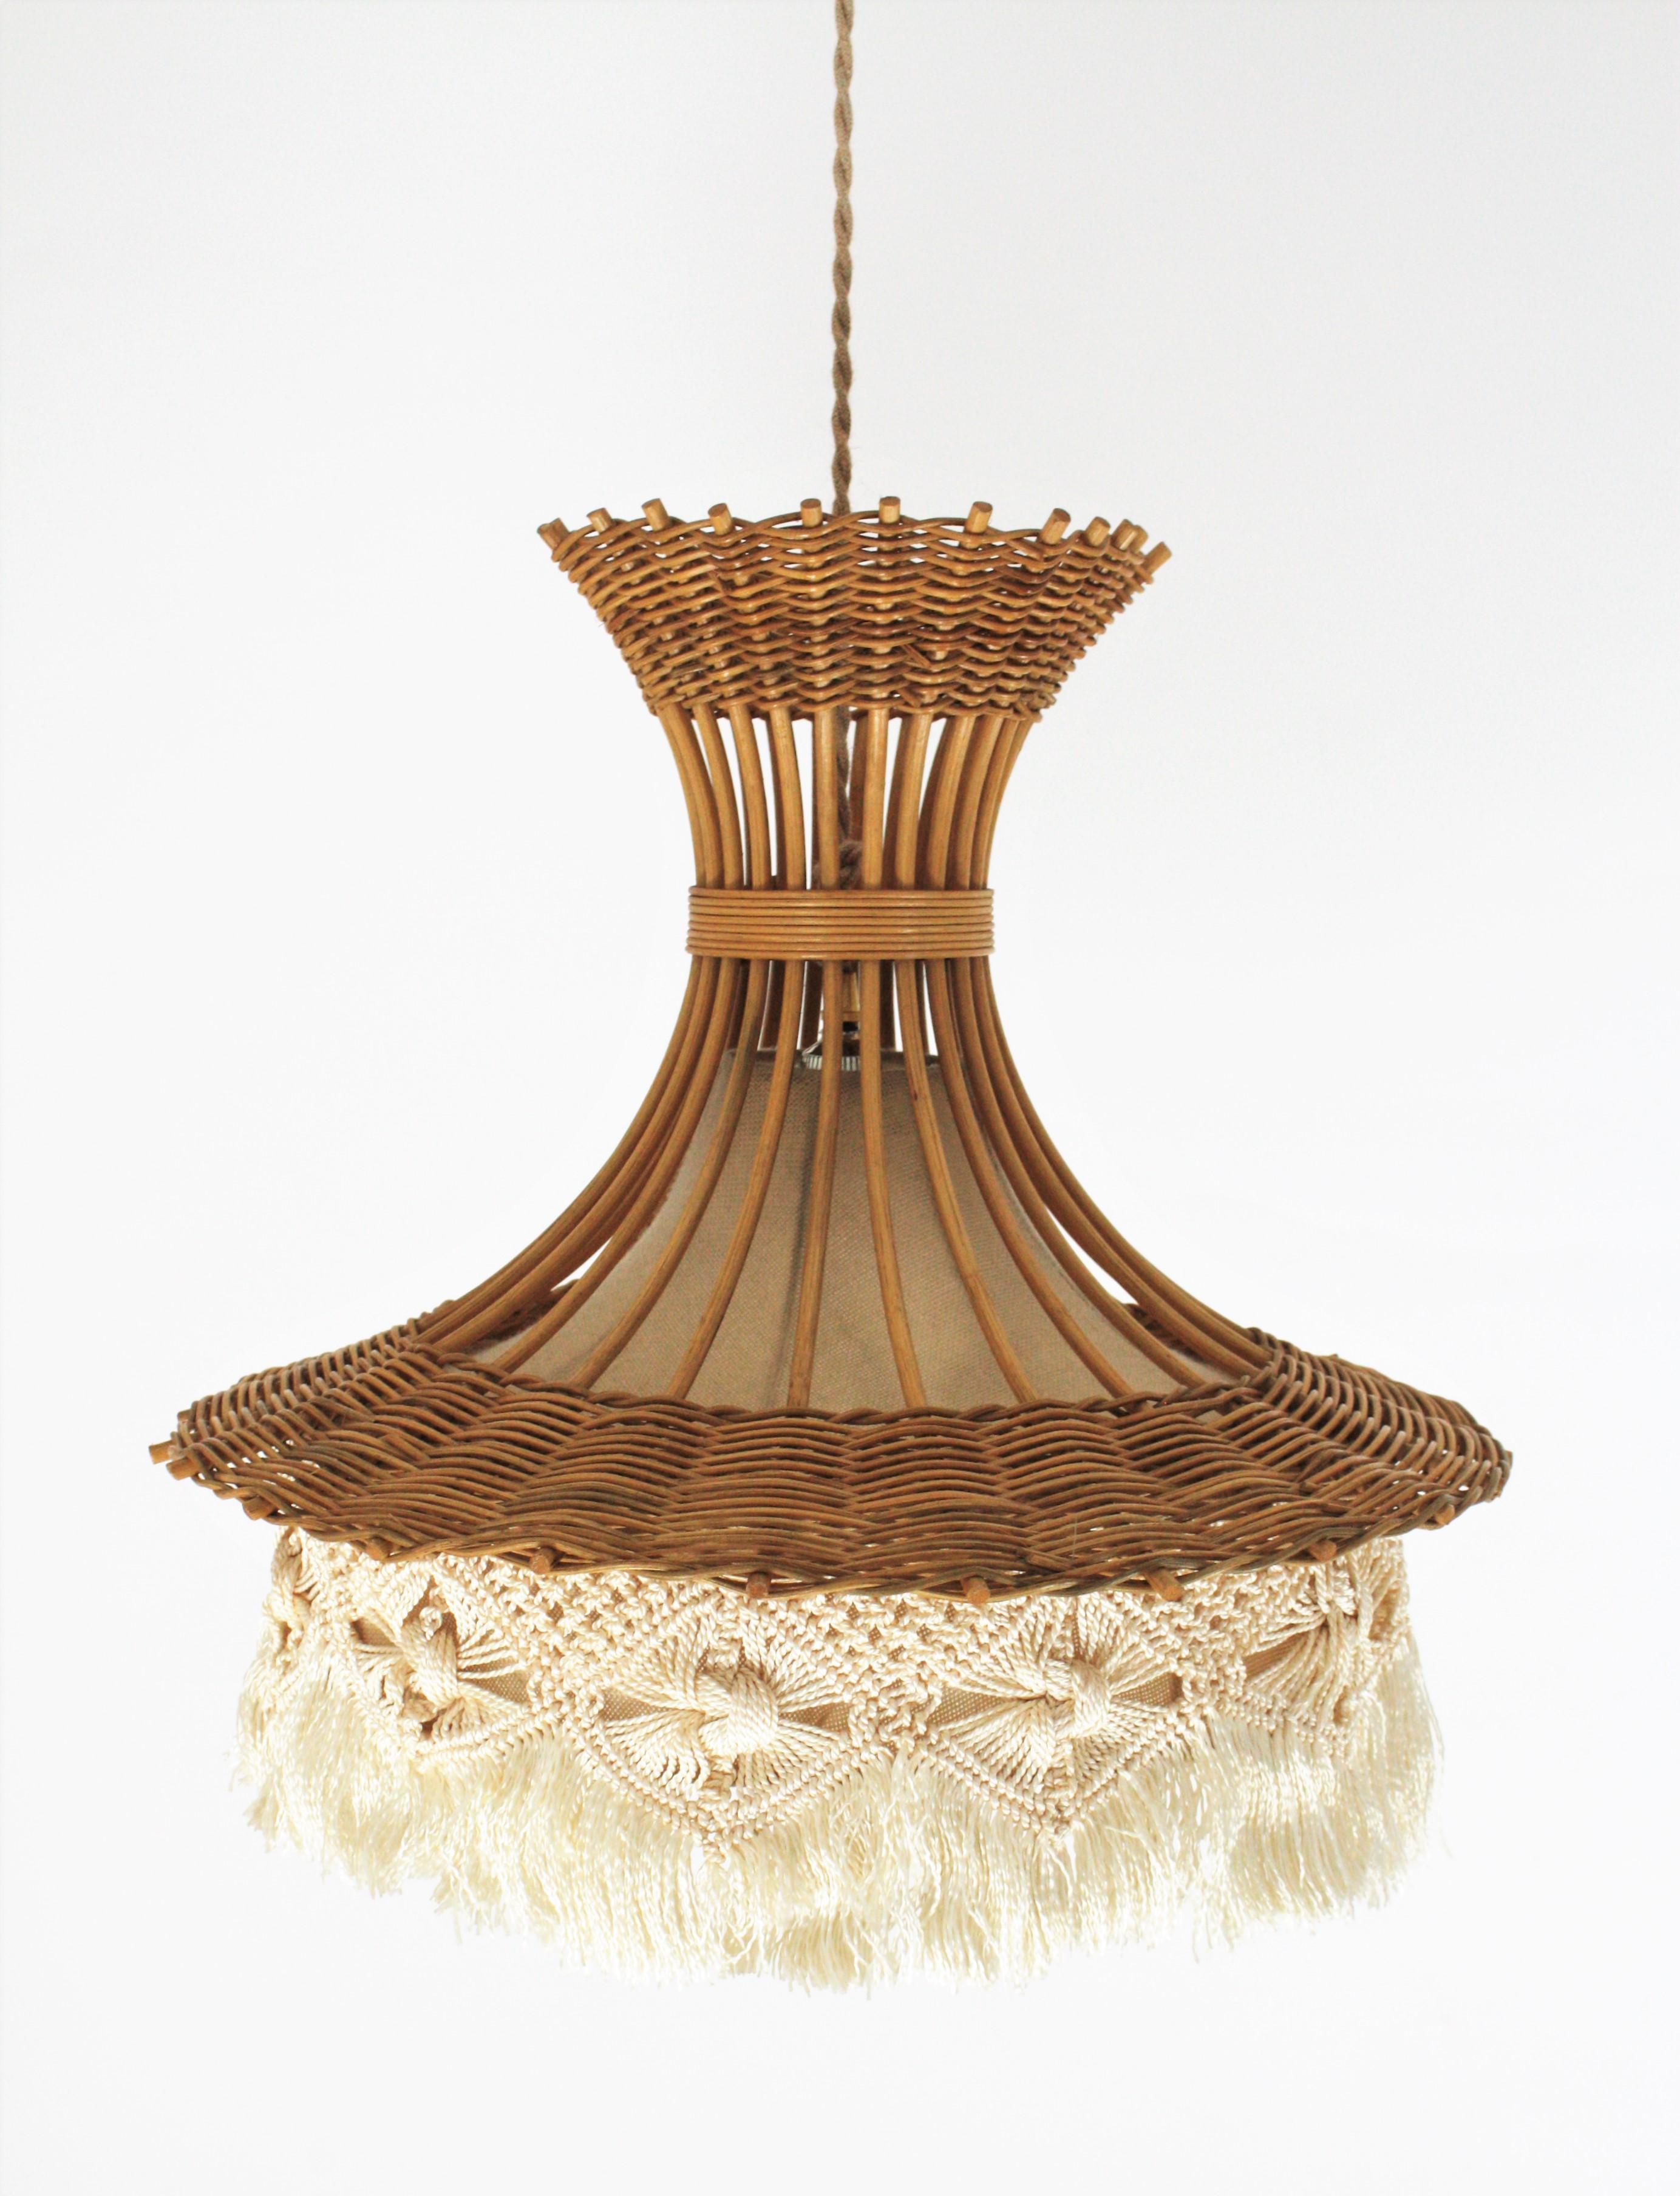 Bohemian French Rattan and Macrame Large Pendant Lamp / Hanging Light with Fringe